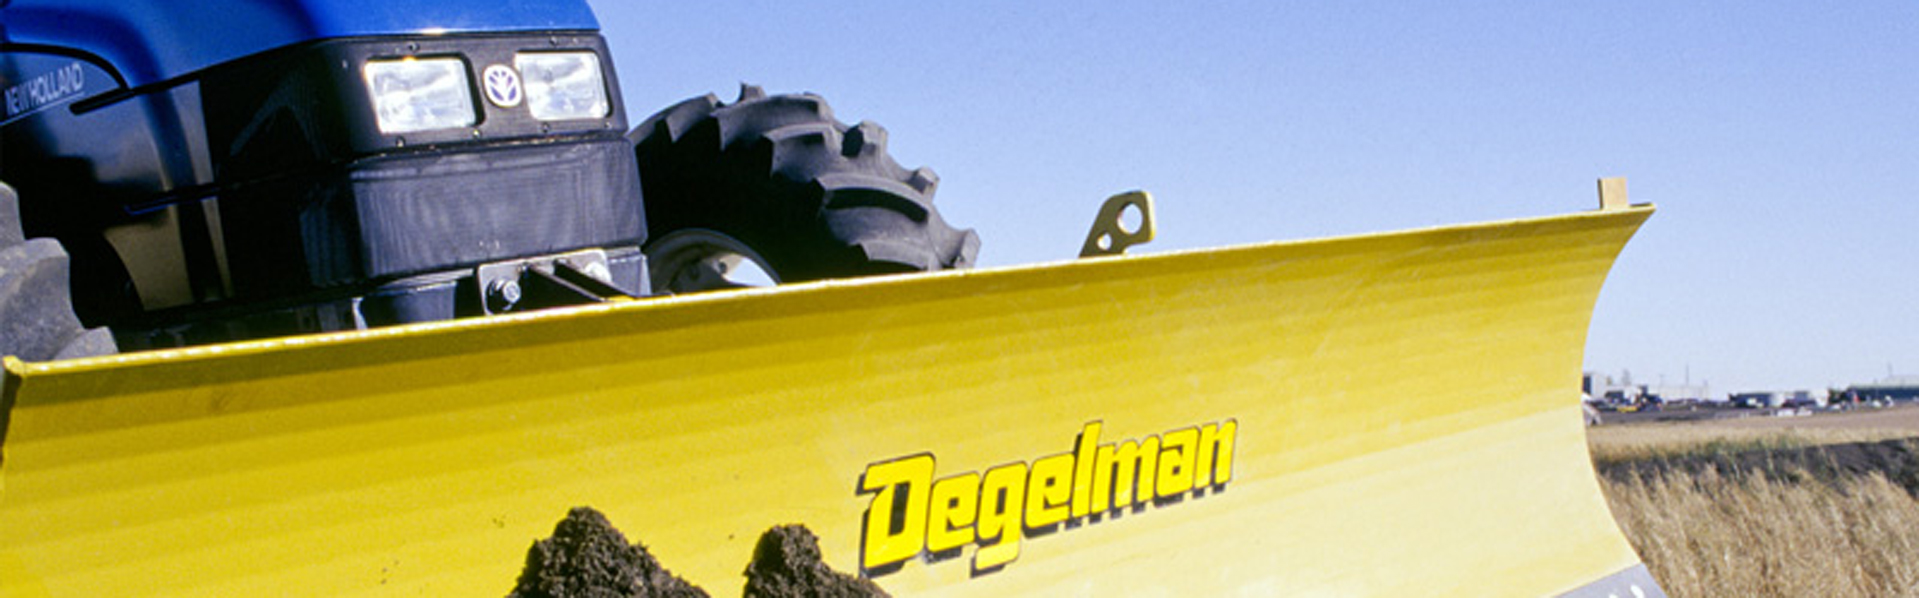 Tri-Ag Implements represents numerous new equipment manufacturers